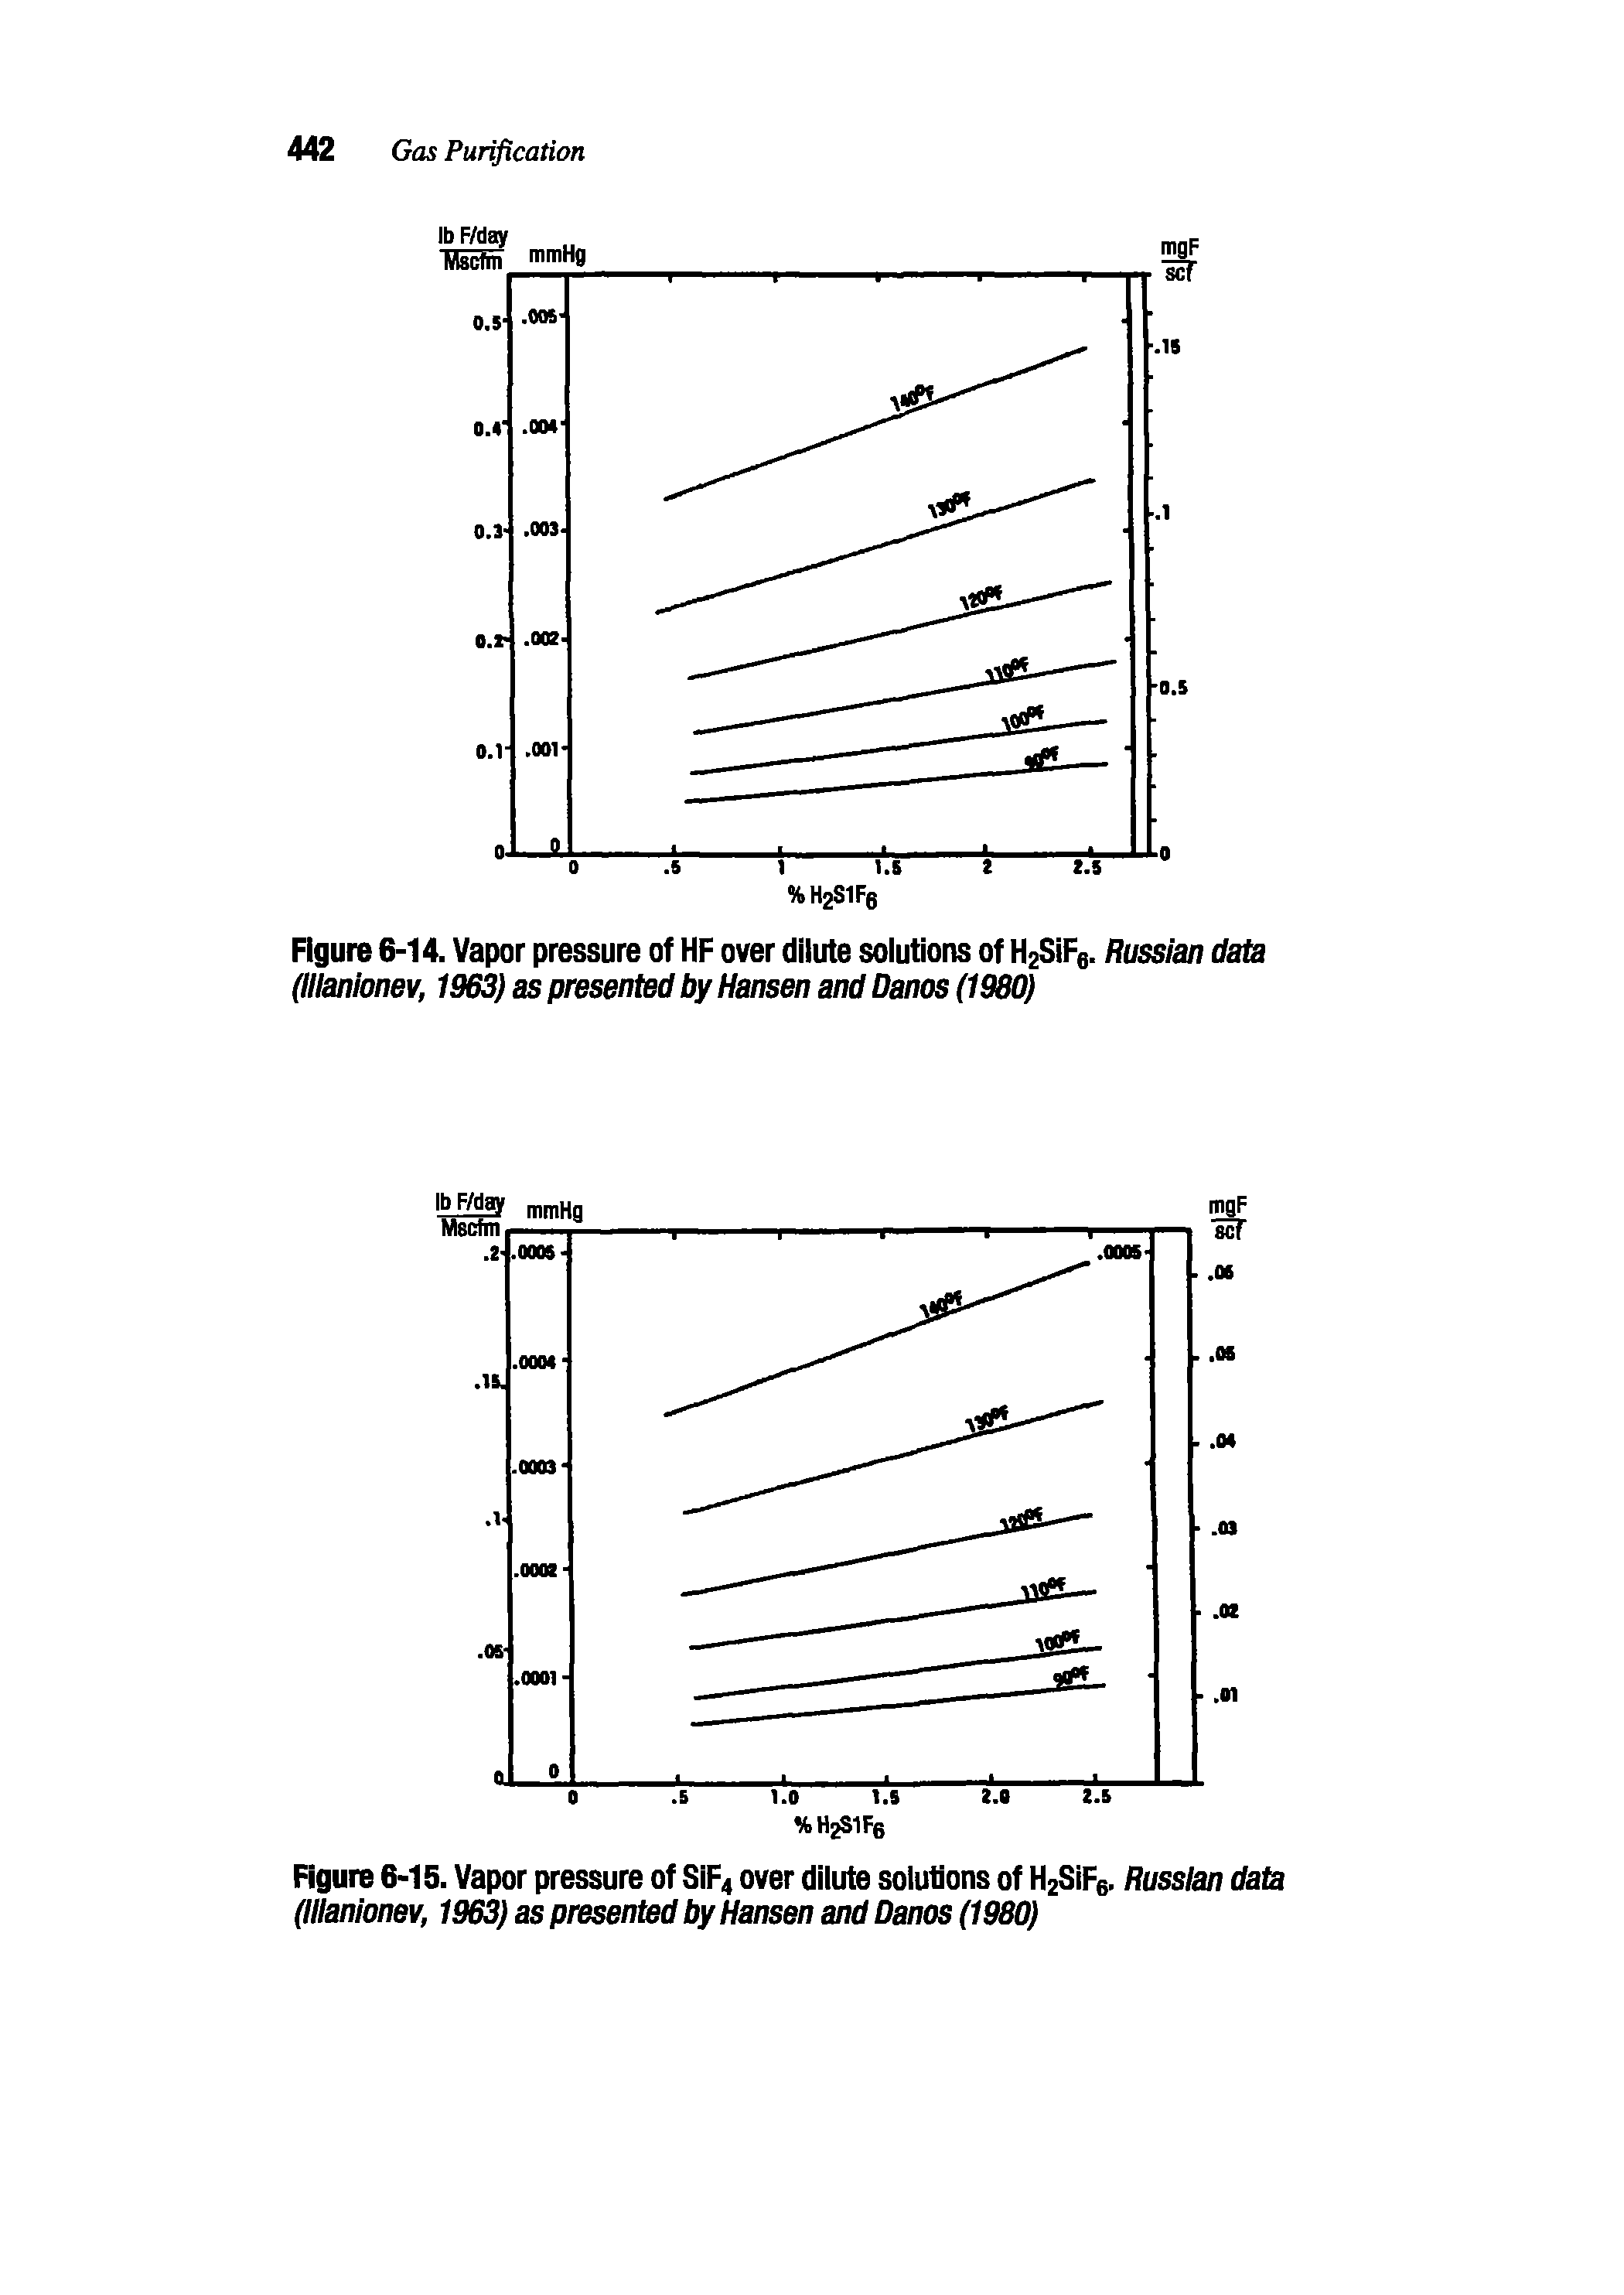 Figure 6-14. Vapor pressure of HF over dilute solutions of H2SiFg. Russian data (lllanlonev, 1963) as presented by Hansen and Danes (1980)...